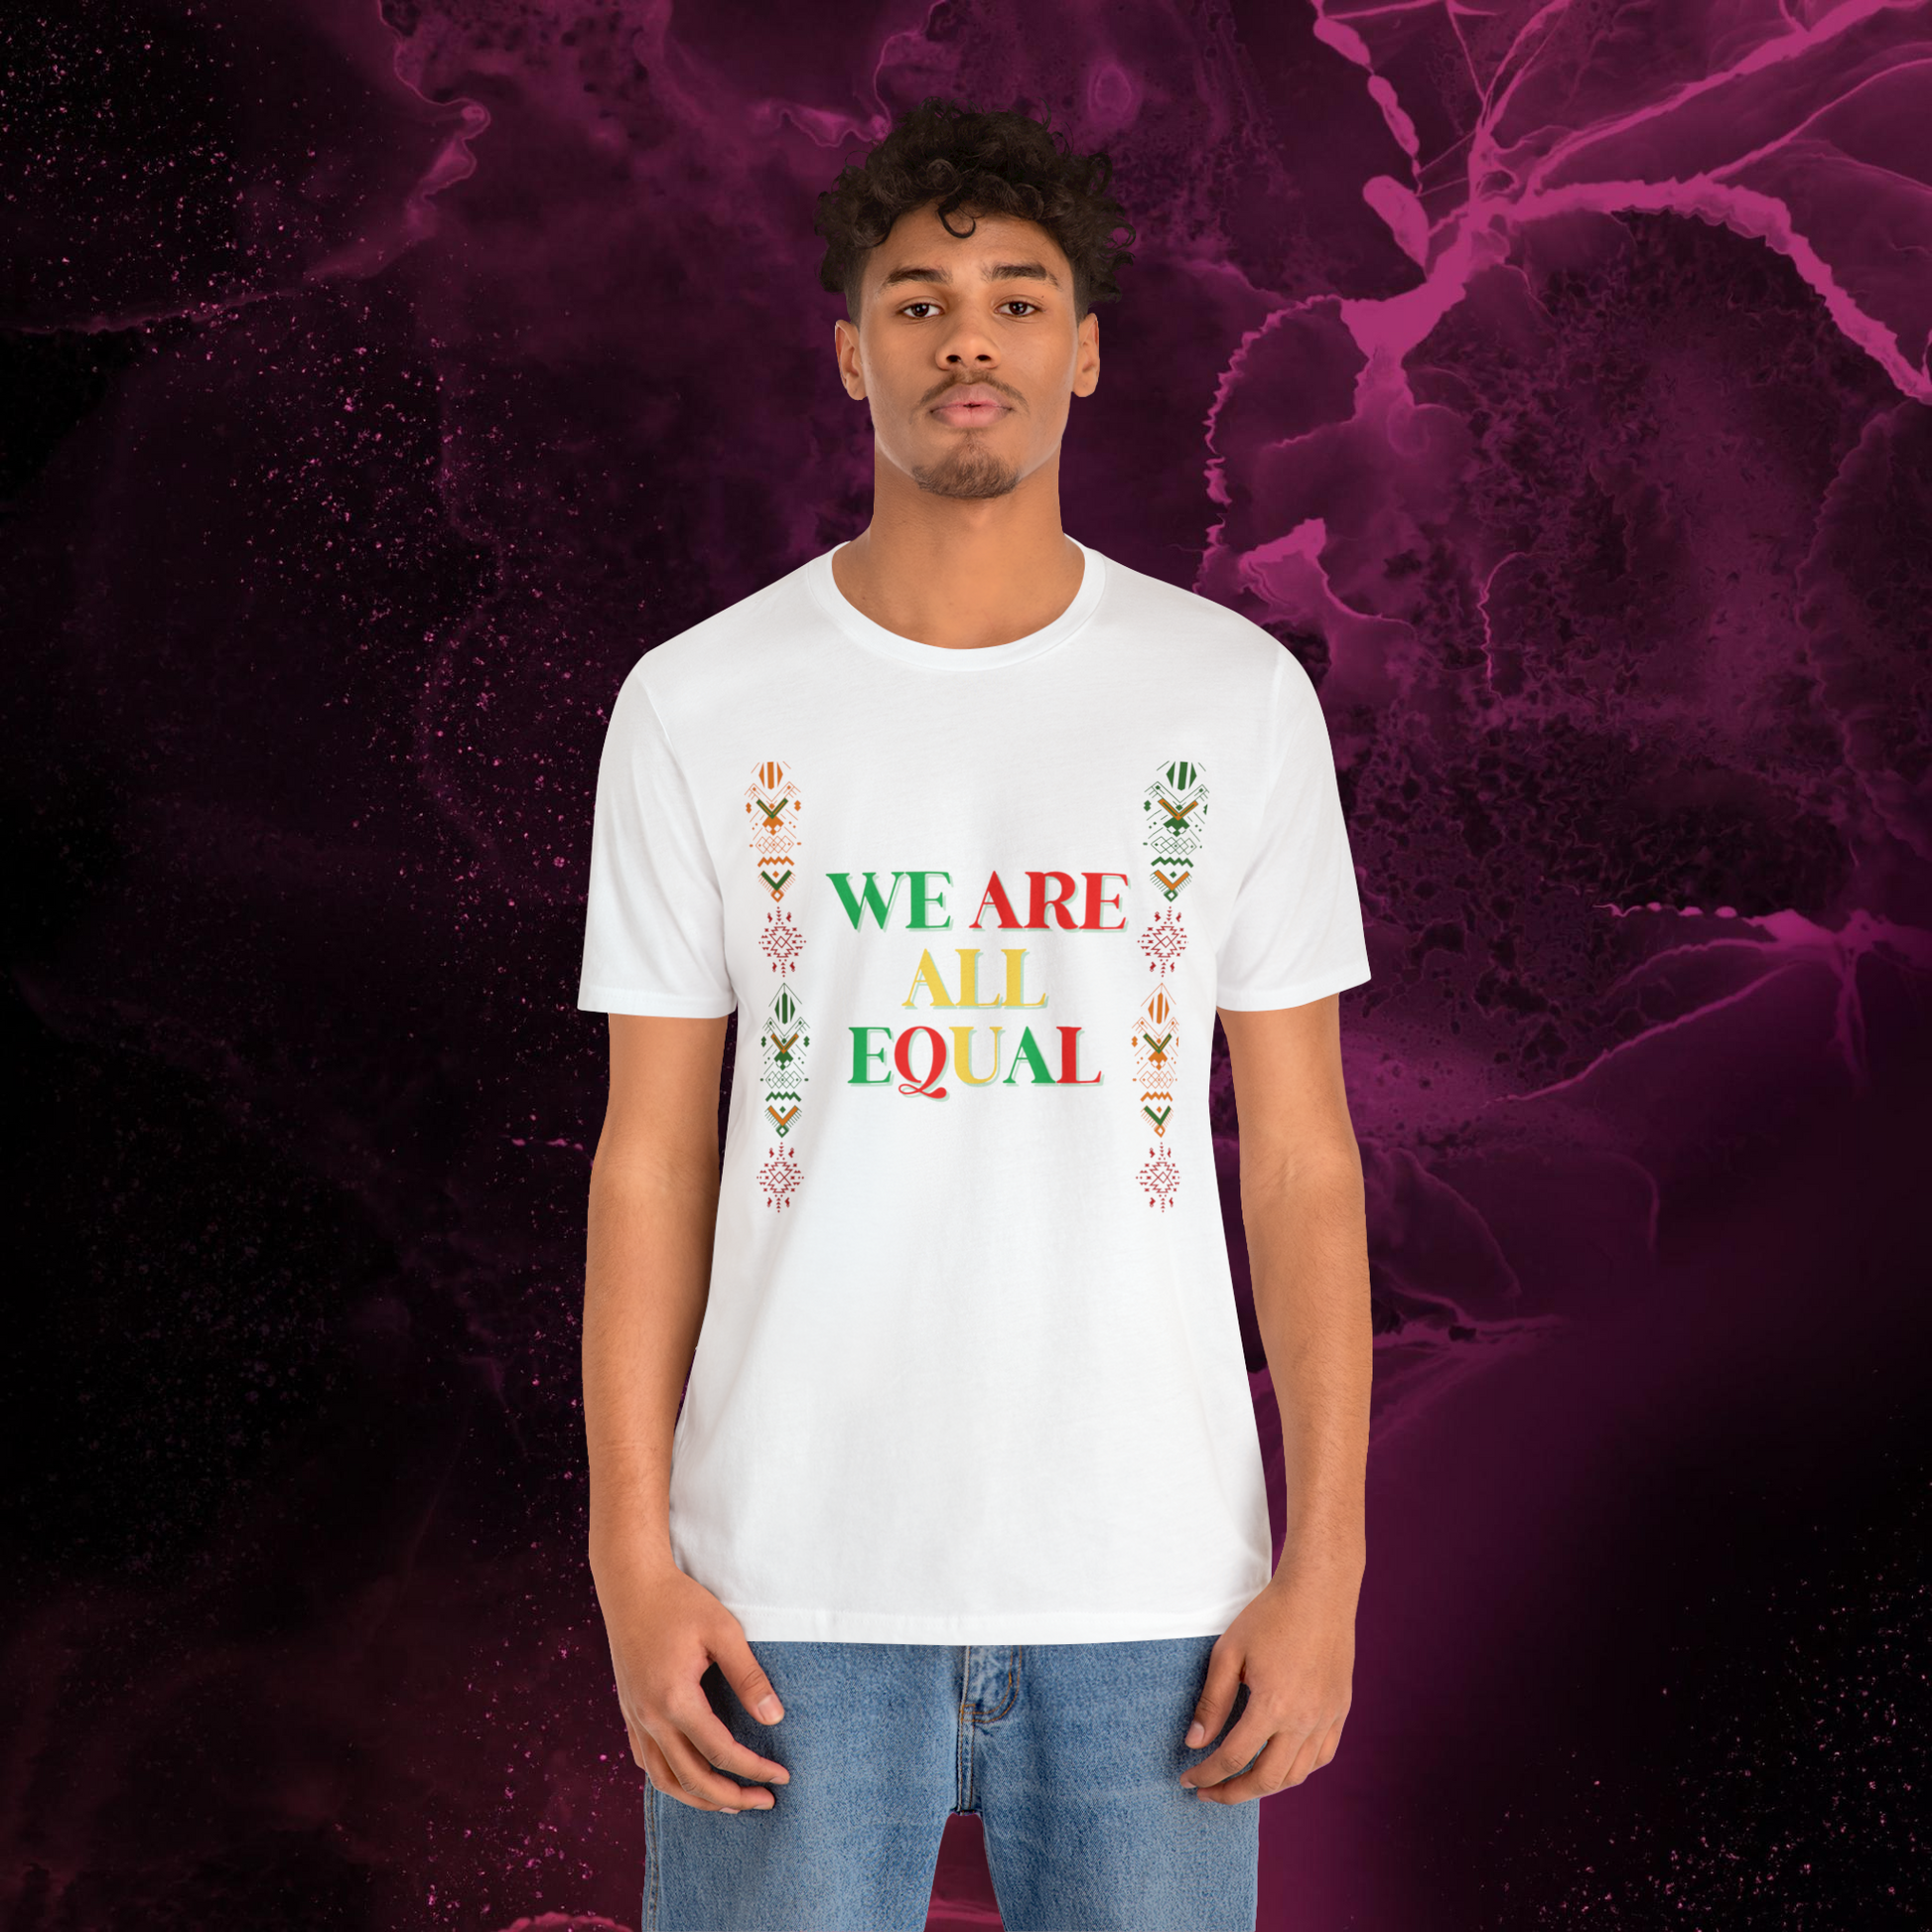 Trendy Black History Month Shirts Celebrating African American Pride and Heritage – We Are All Equal T-Shirt   